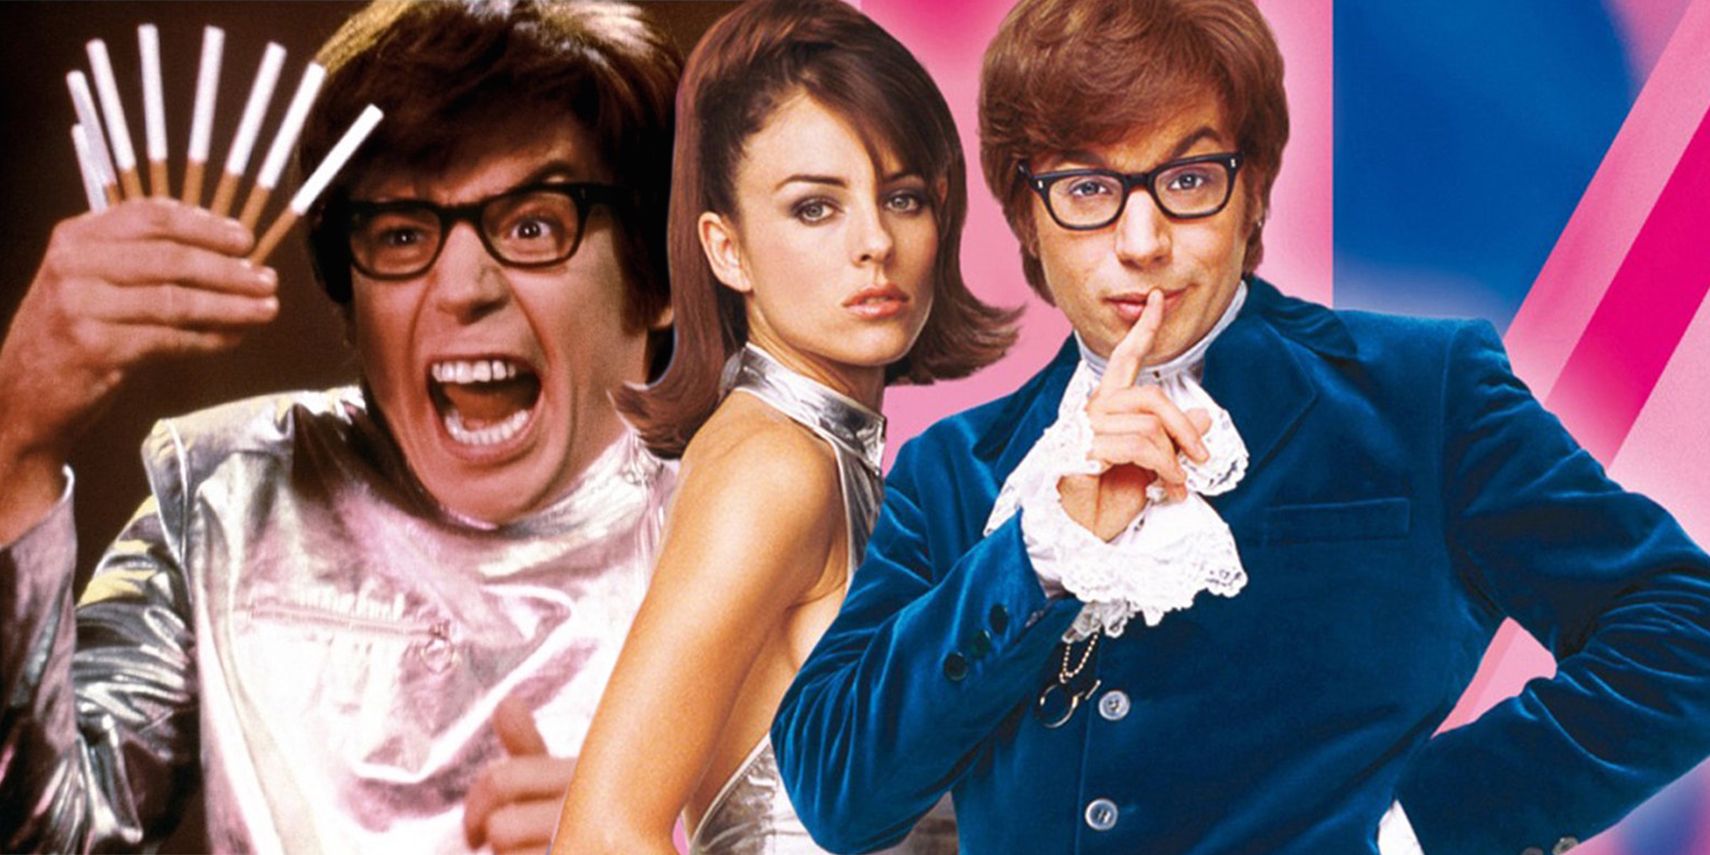 Collage of images from the Austin Powers movies